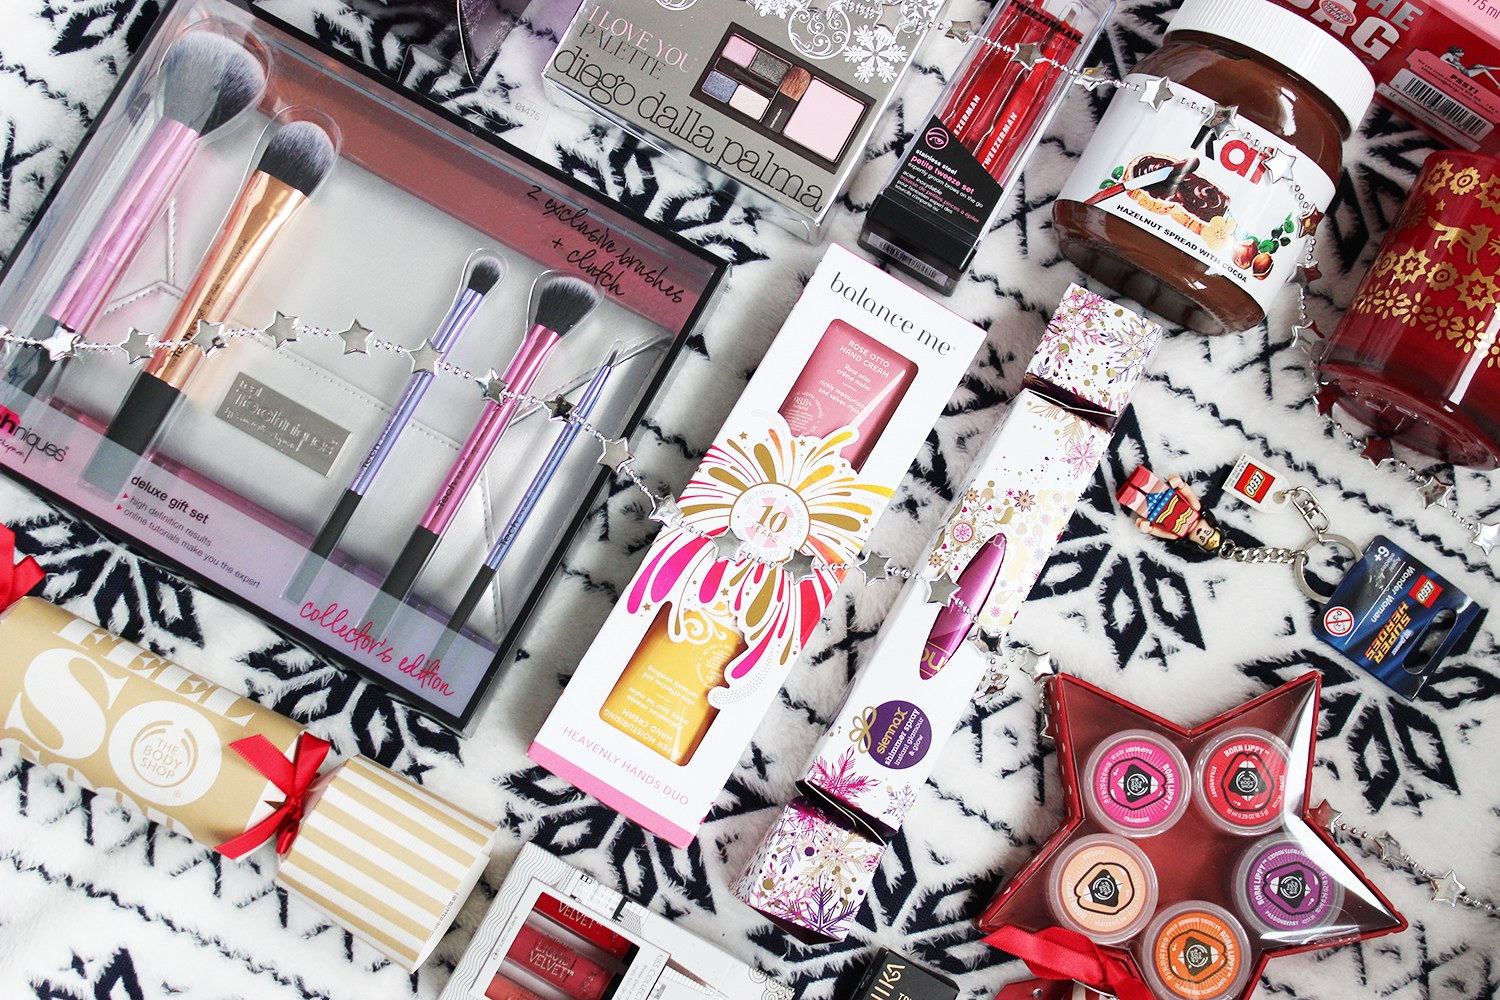 Affordable beauty gift ideas for her